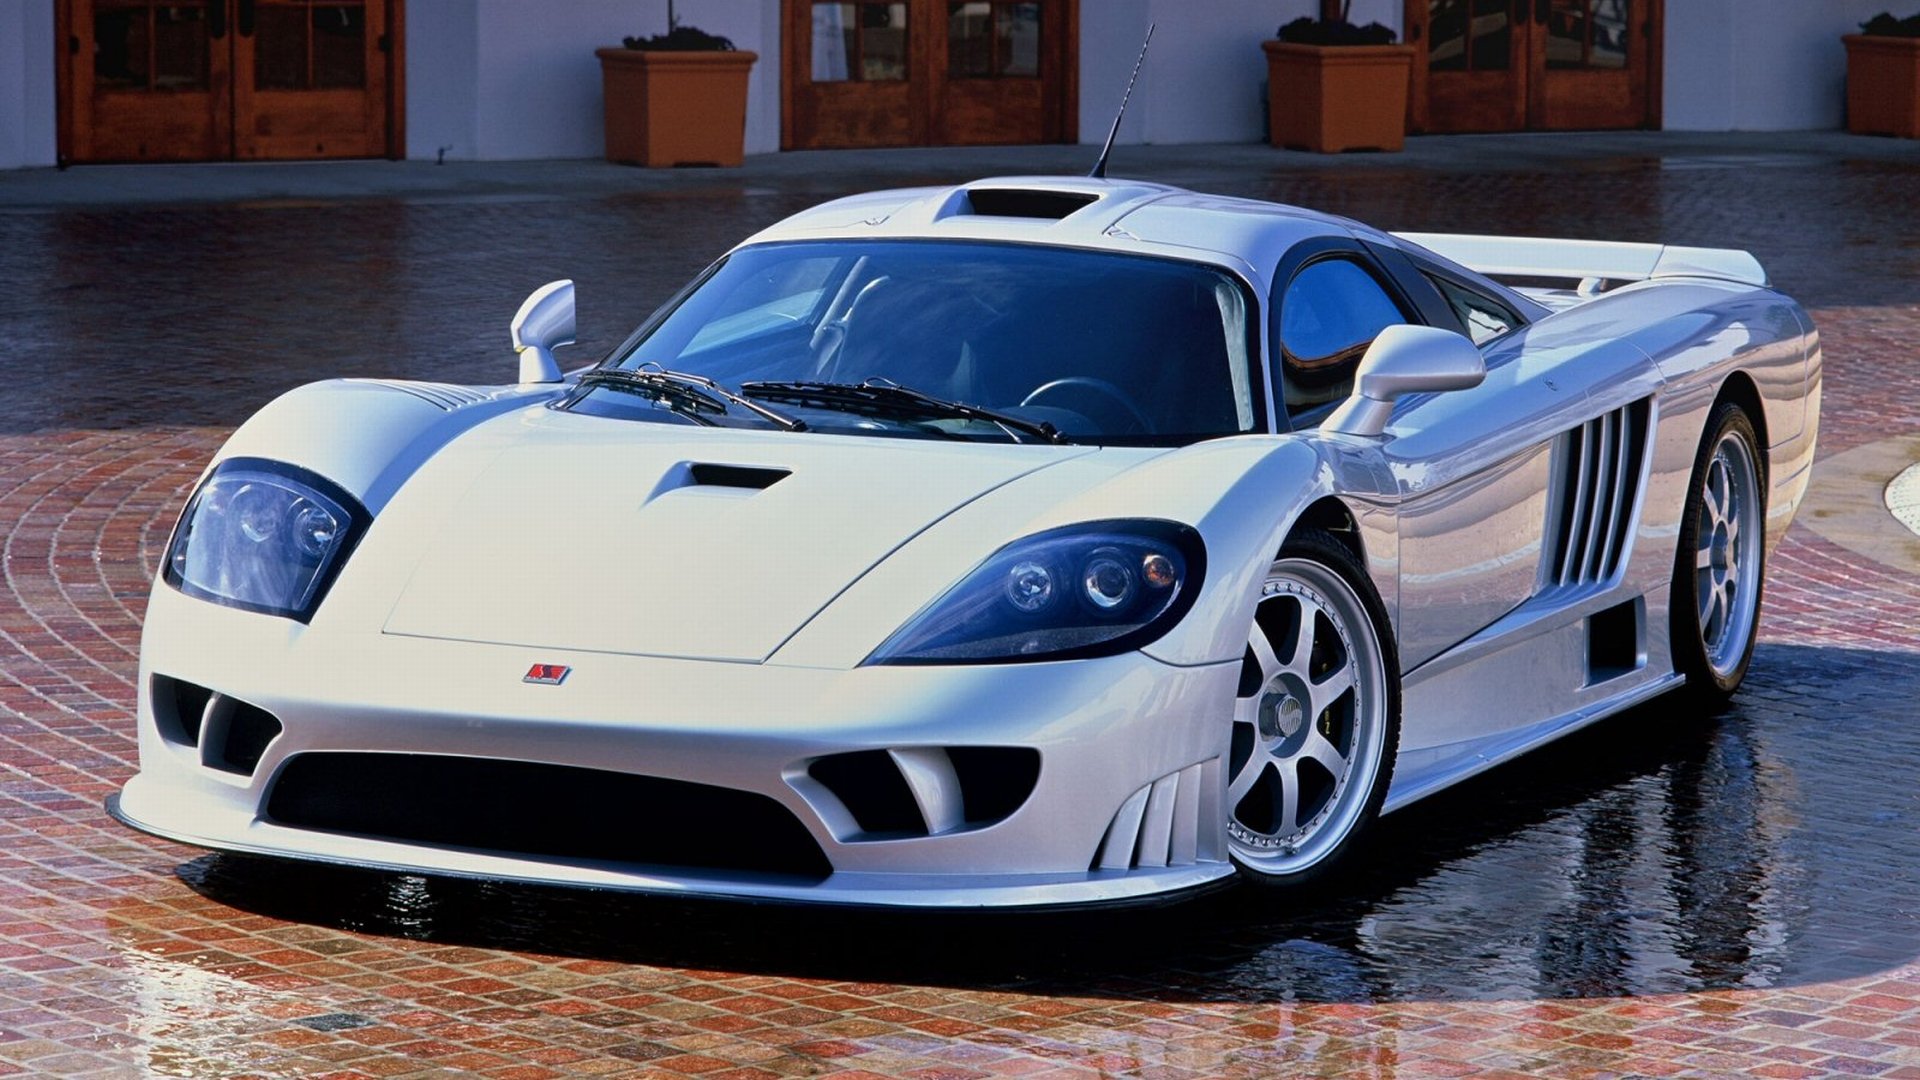 Saleen» 1080P, 2k, 4k HD wallpapers, backgrounds free download | Rare  Gallery